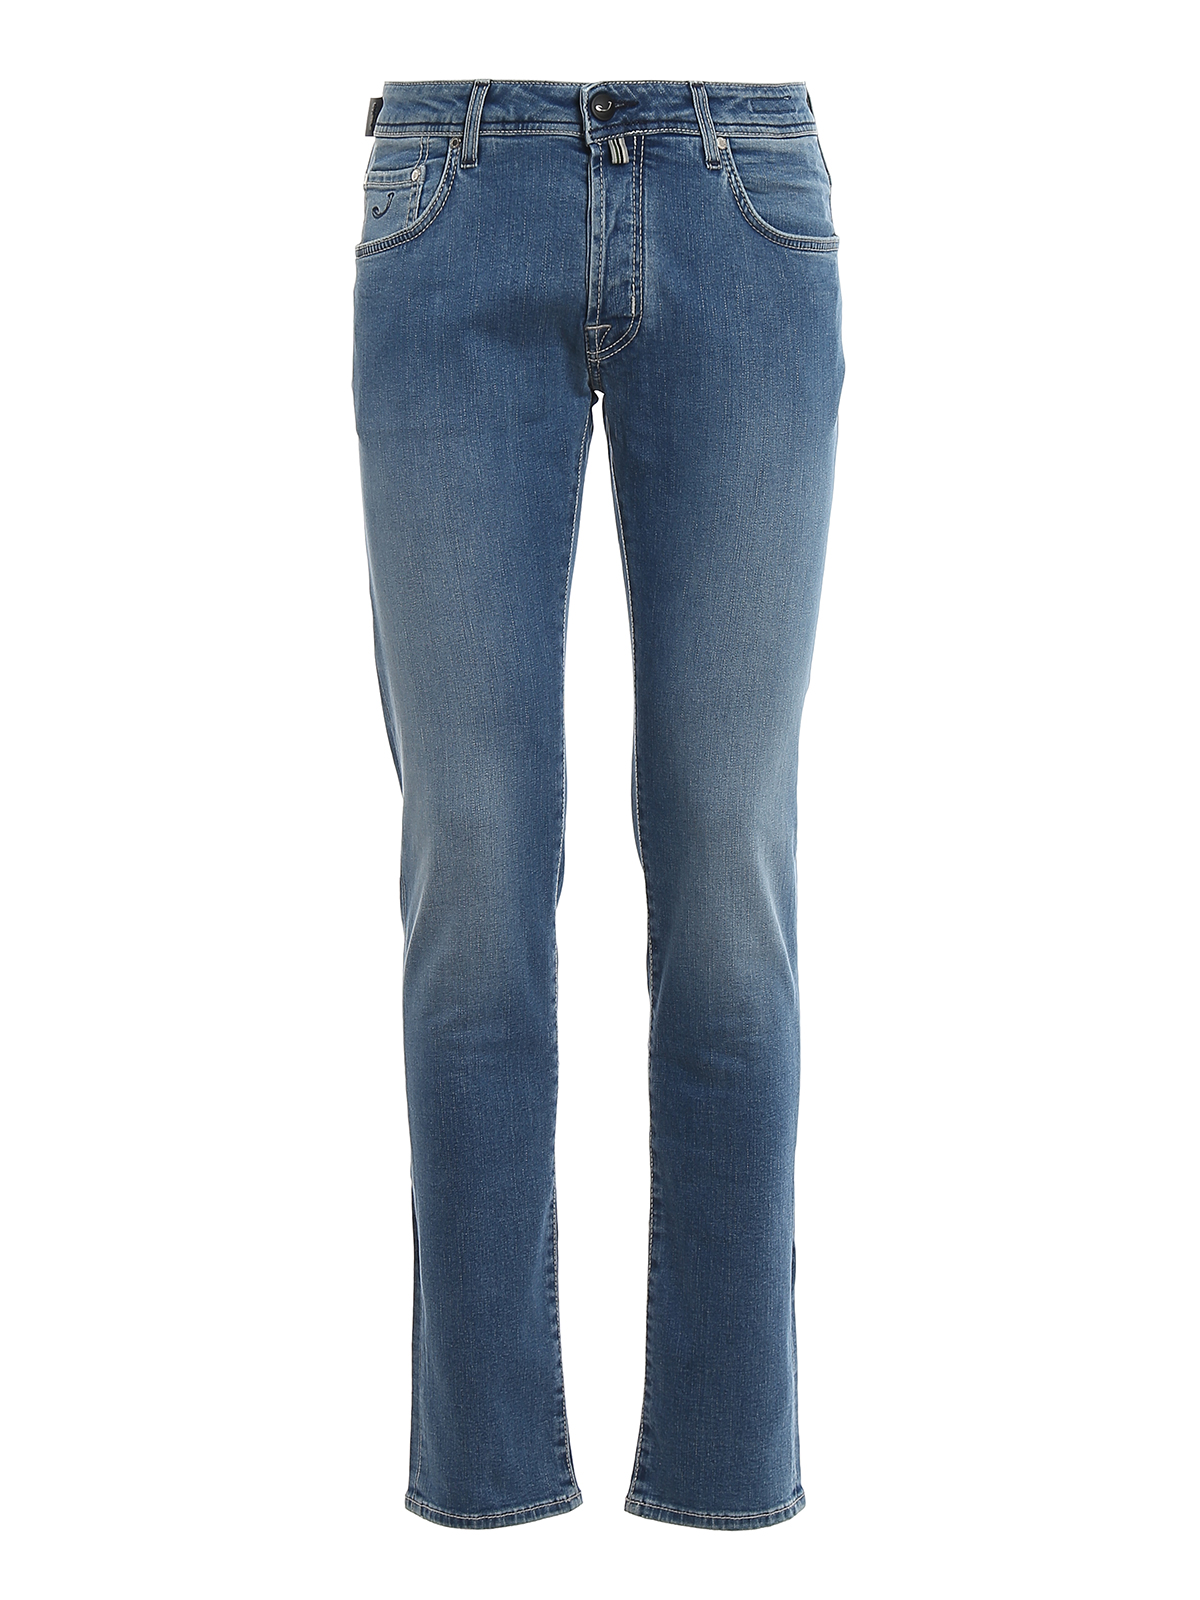 Jacob Cohen Style J622 Comf Jeans In Light Wash